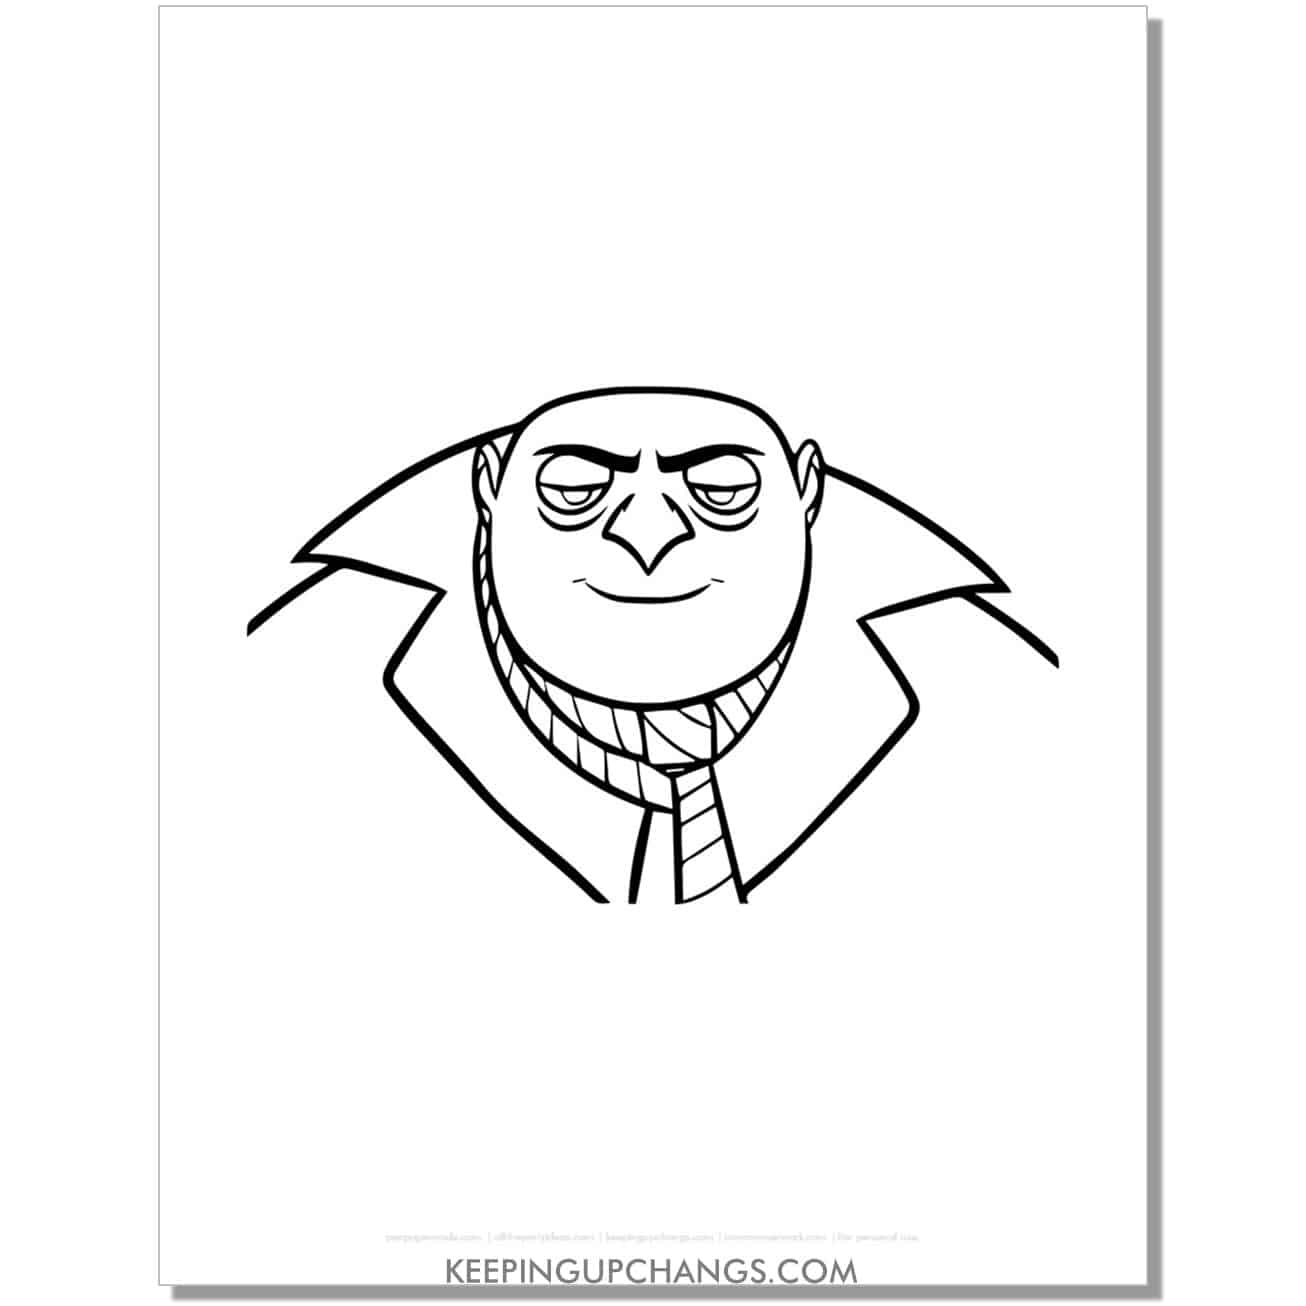 free gru despicable me coloring page, sheet.